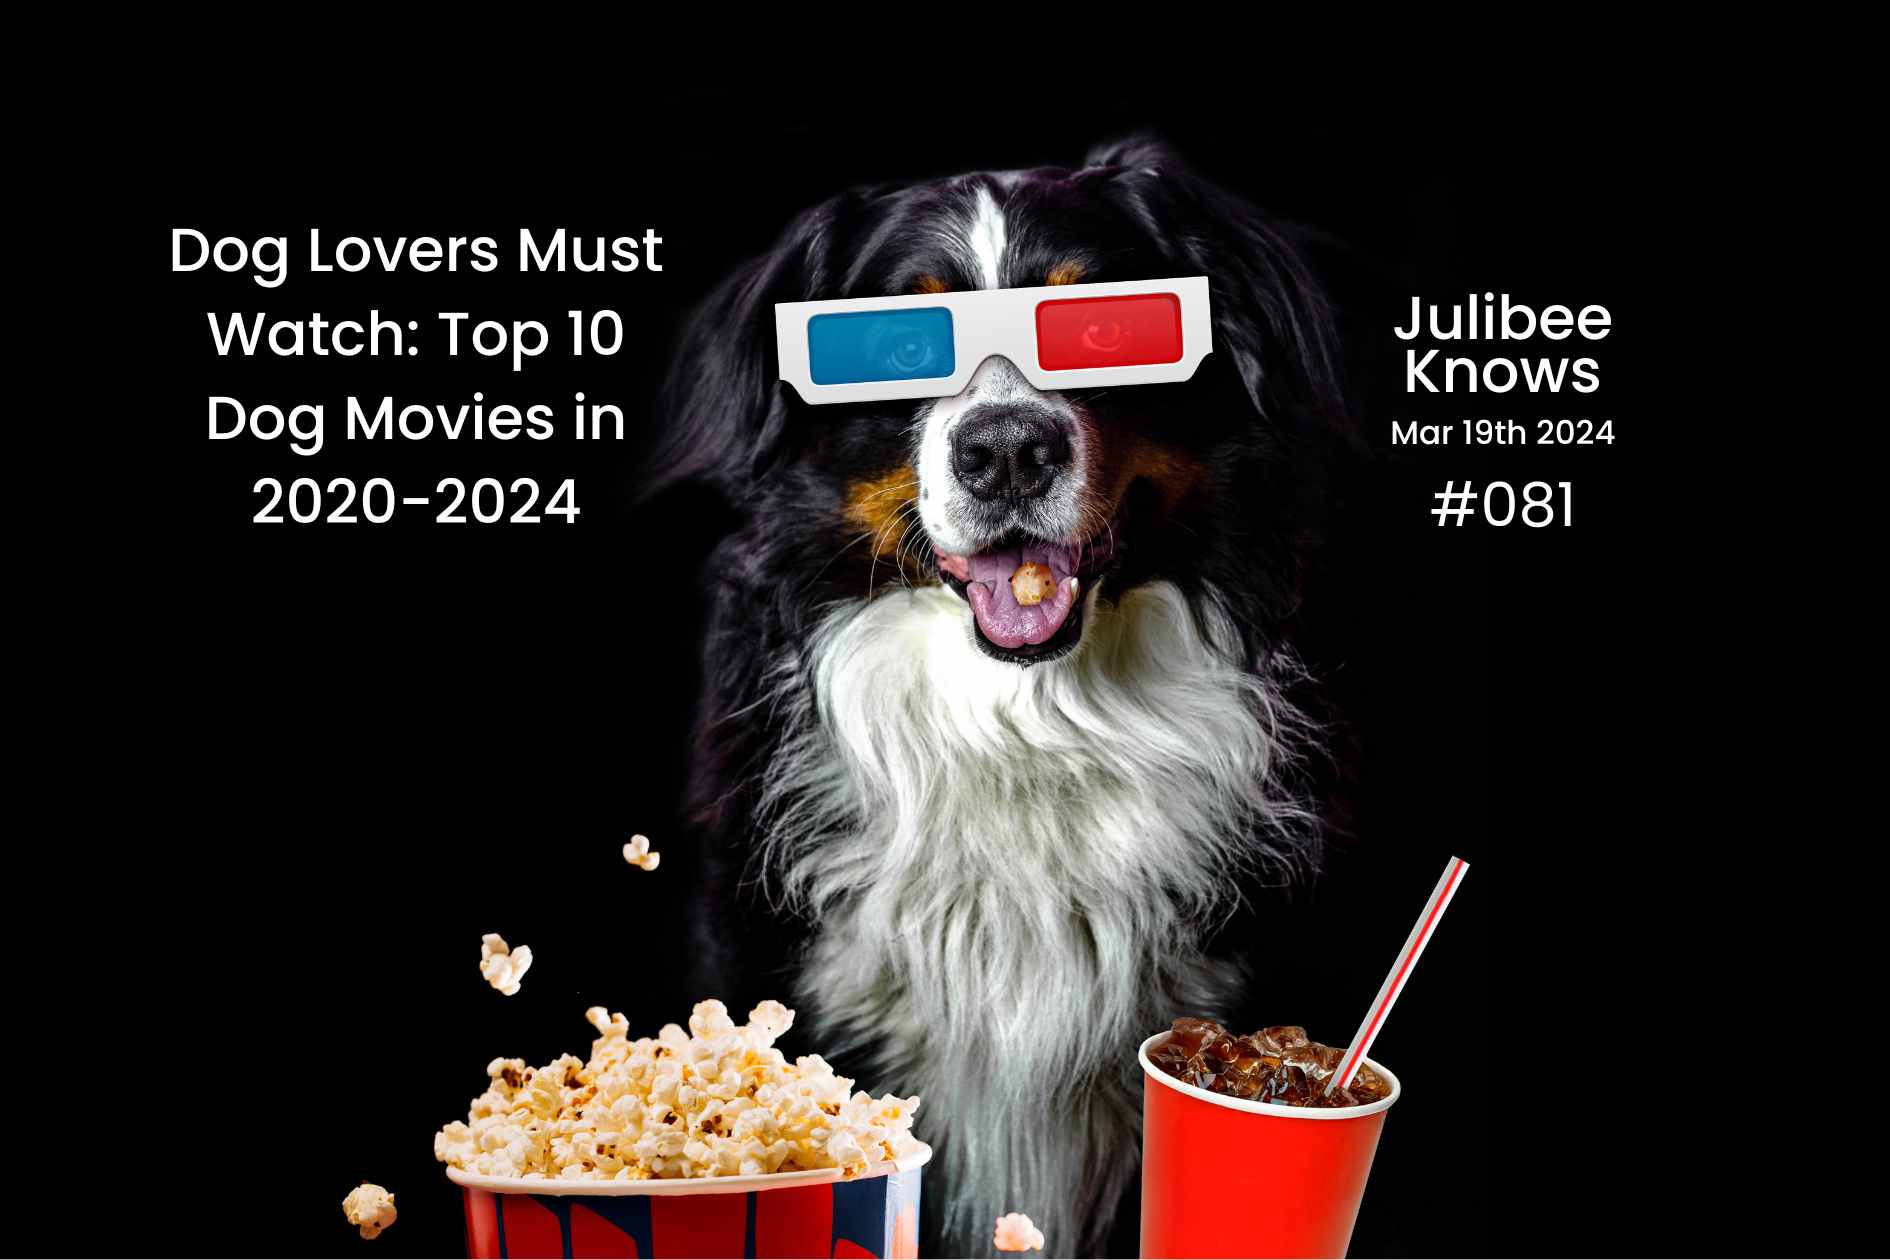 Dog Lovers Must Watch: Top 9 Dog Movies in 2020-2024